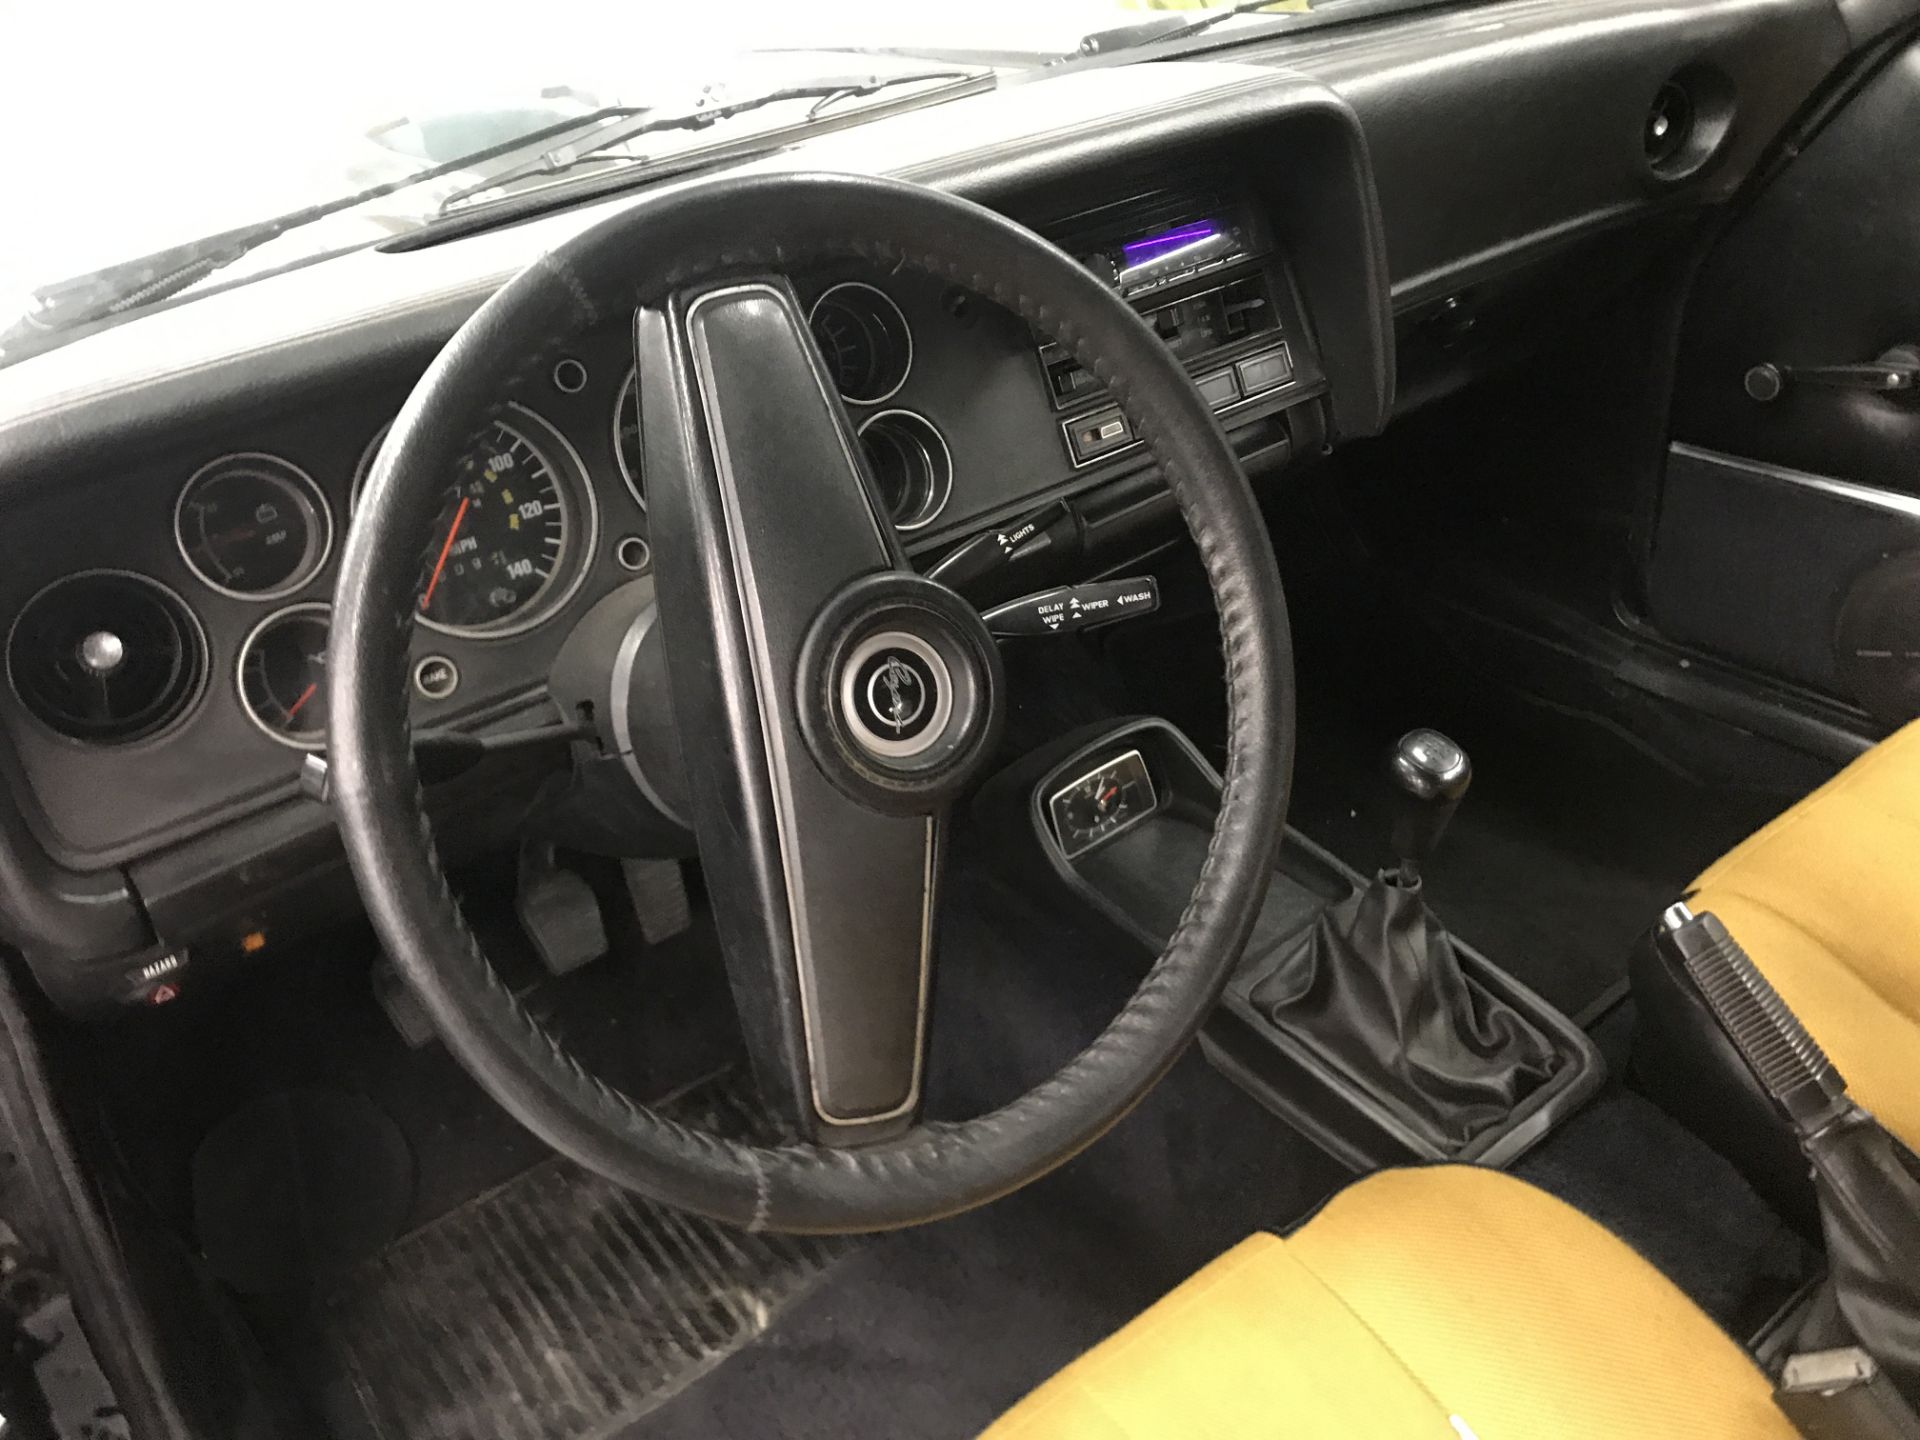 1976 Mercury Capri Coupe, Restored and Autographed By MIKE & ANT of “WHEELER DEALERS”, V6 Engine, - Image 11 of 13